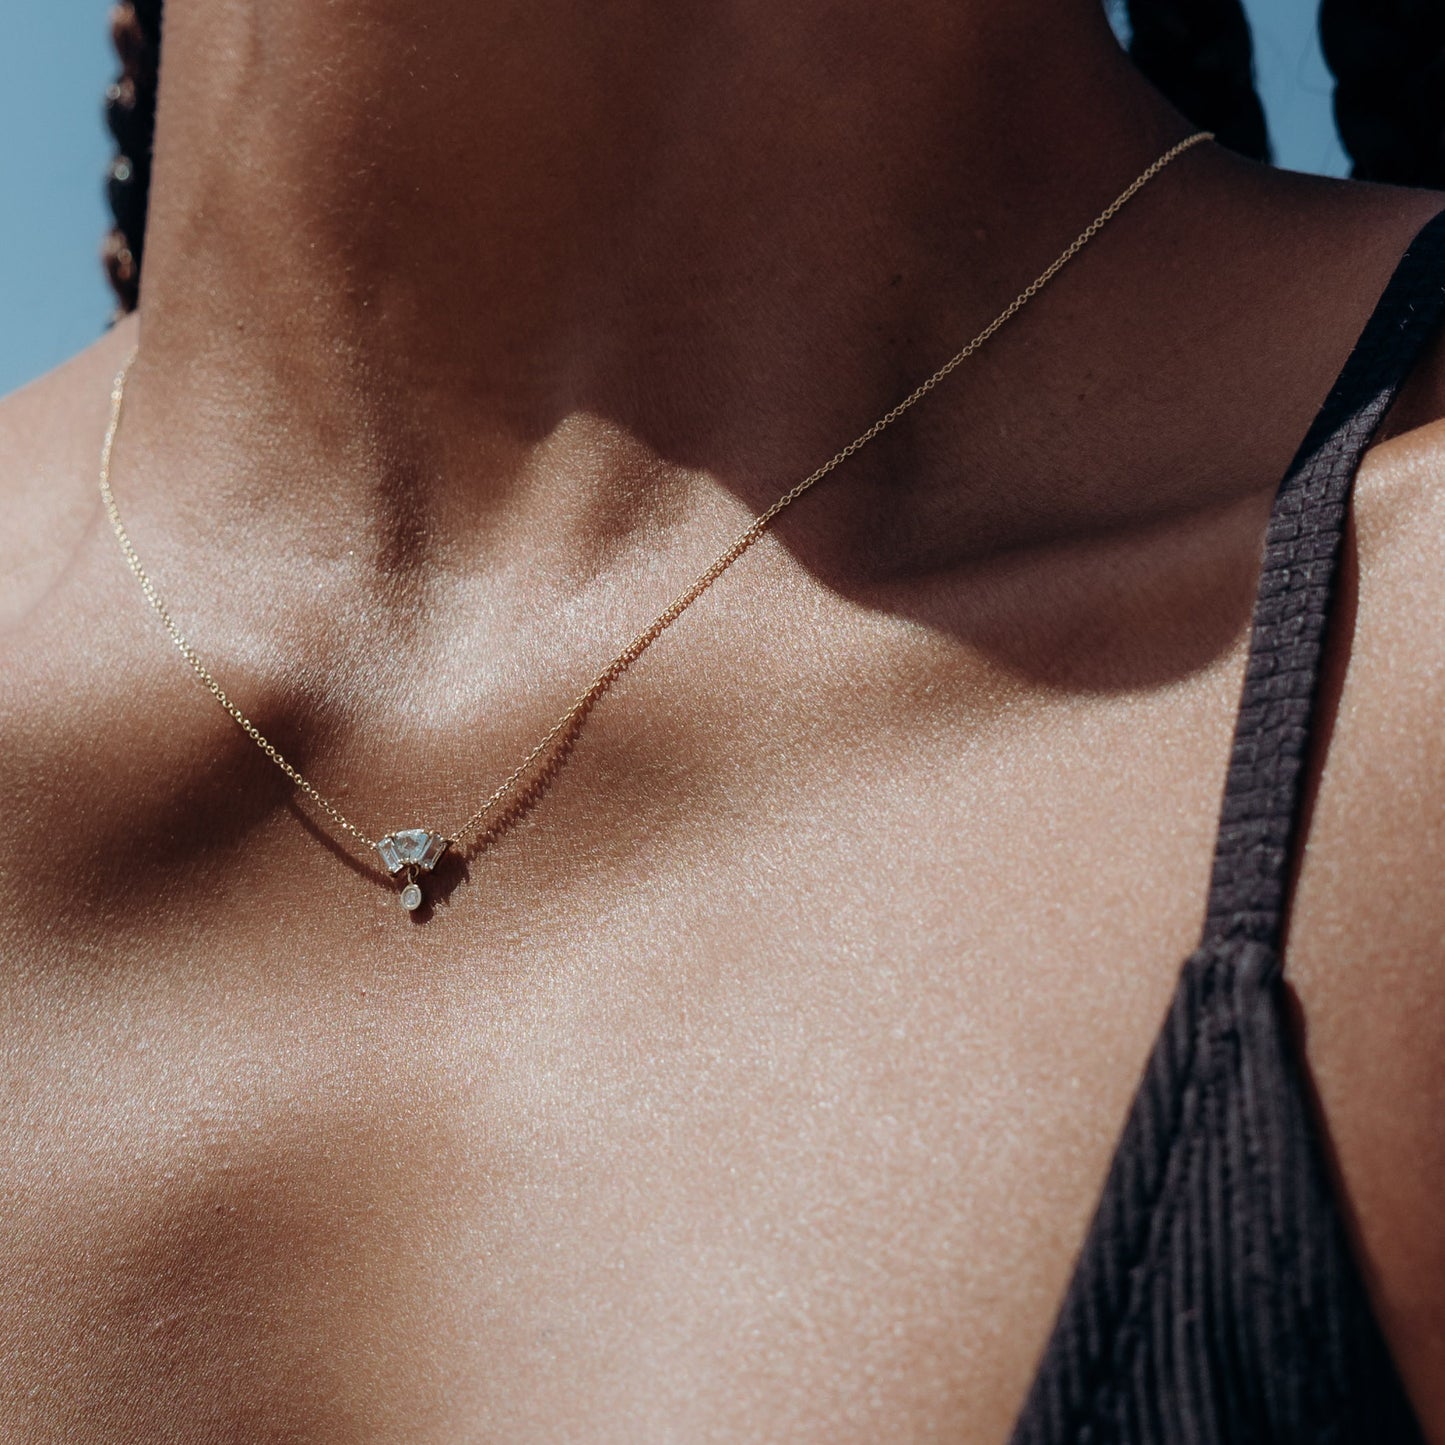 Ocean Fan Necklace - Carly Cushnie for Starling